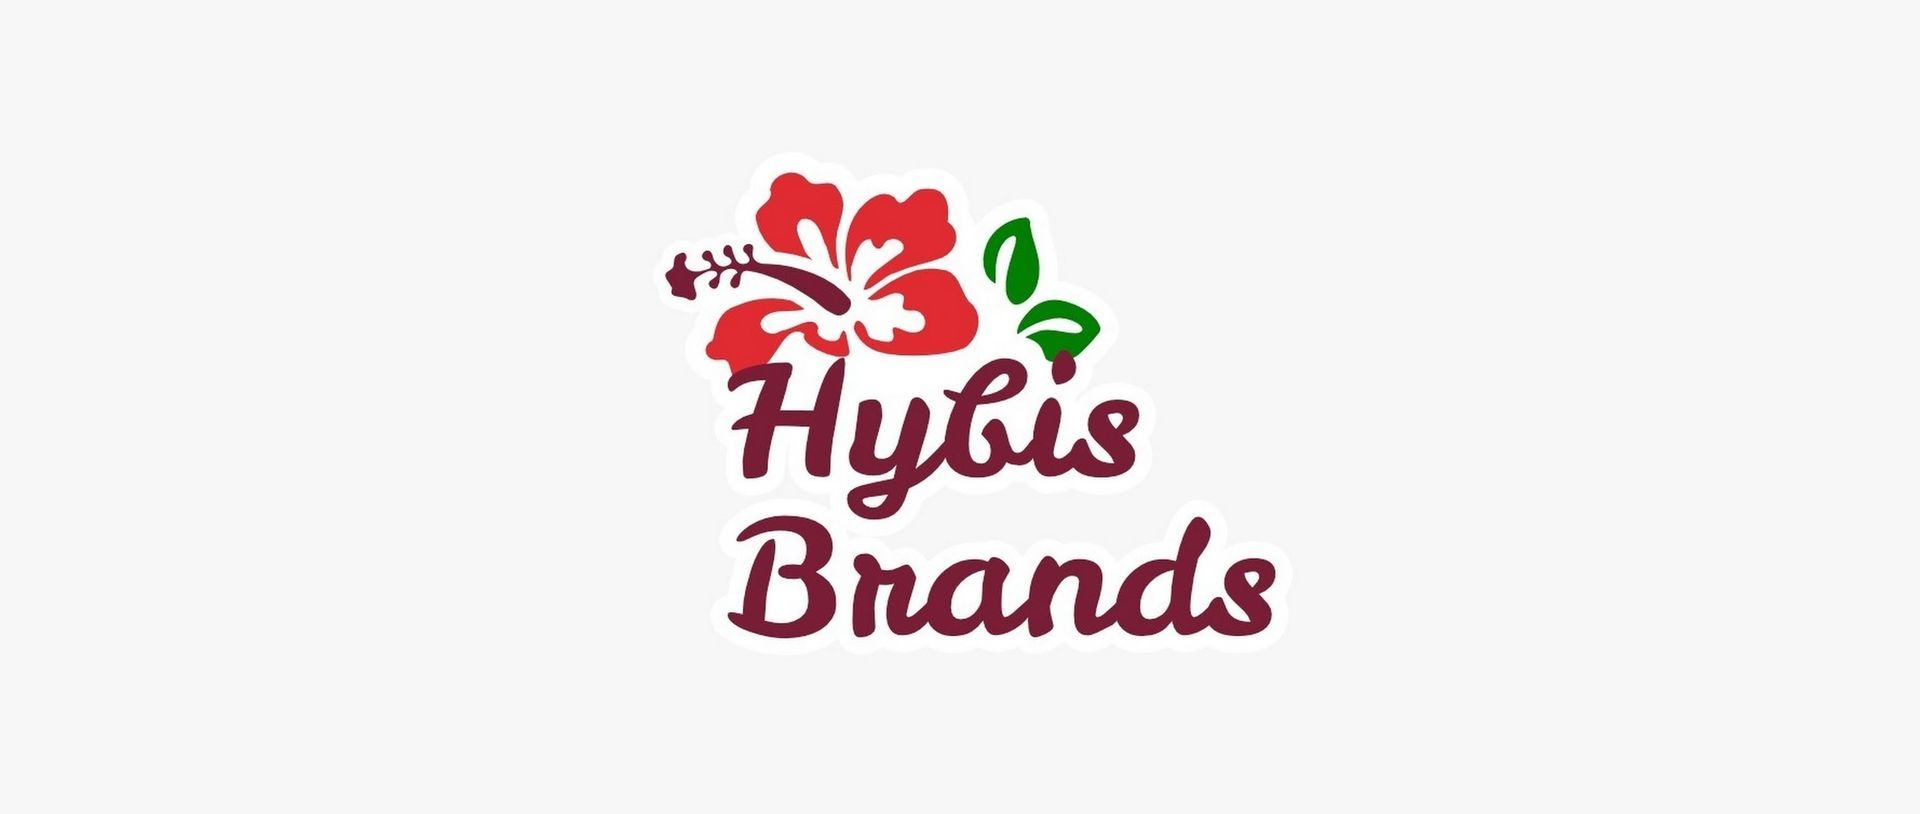 The logo for hybis brands has a red hibiscus flower and green leaves.